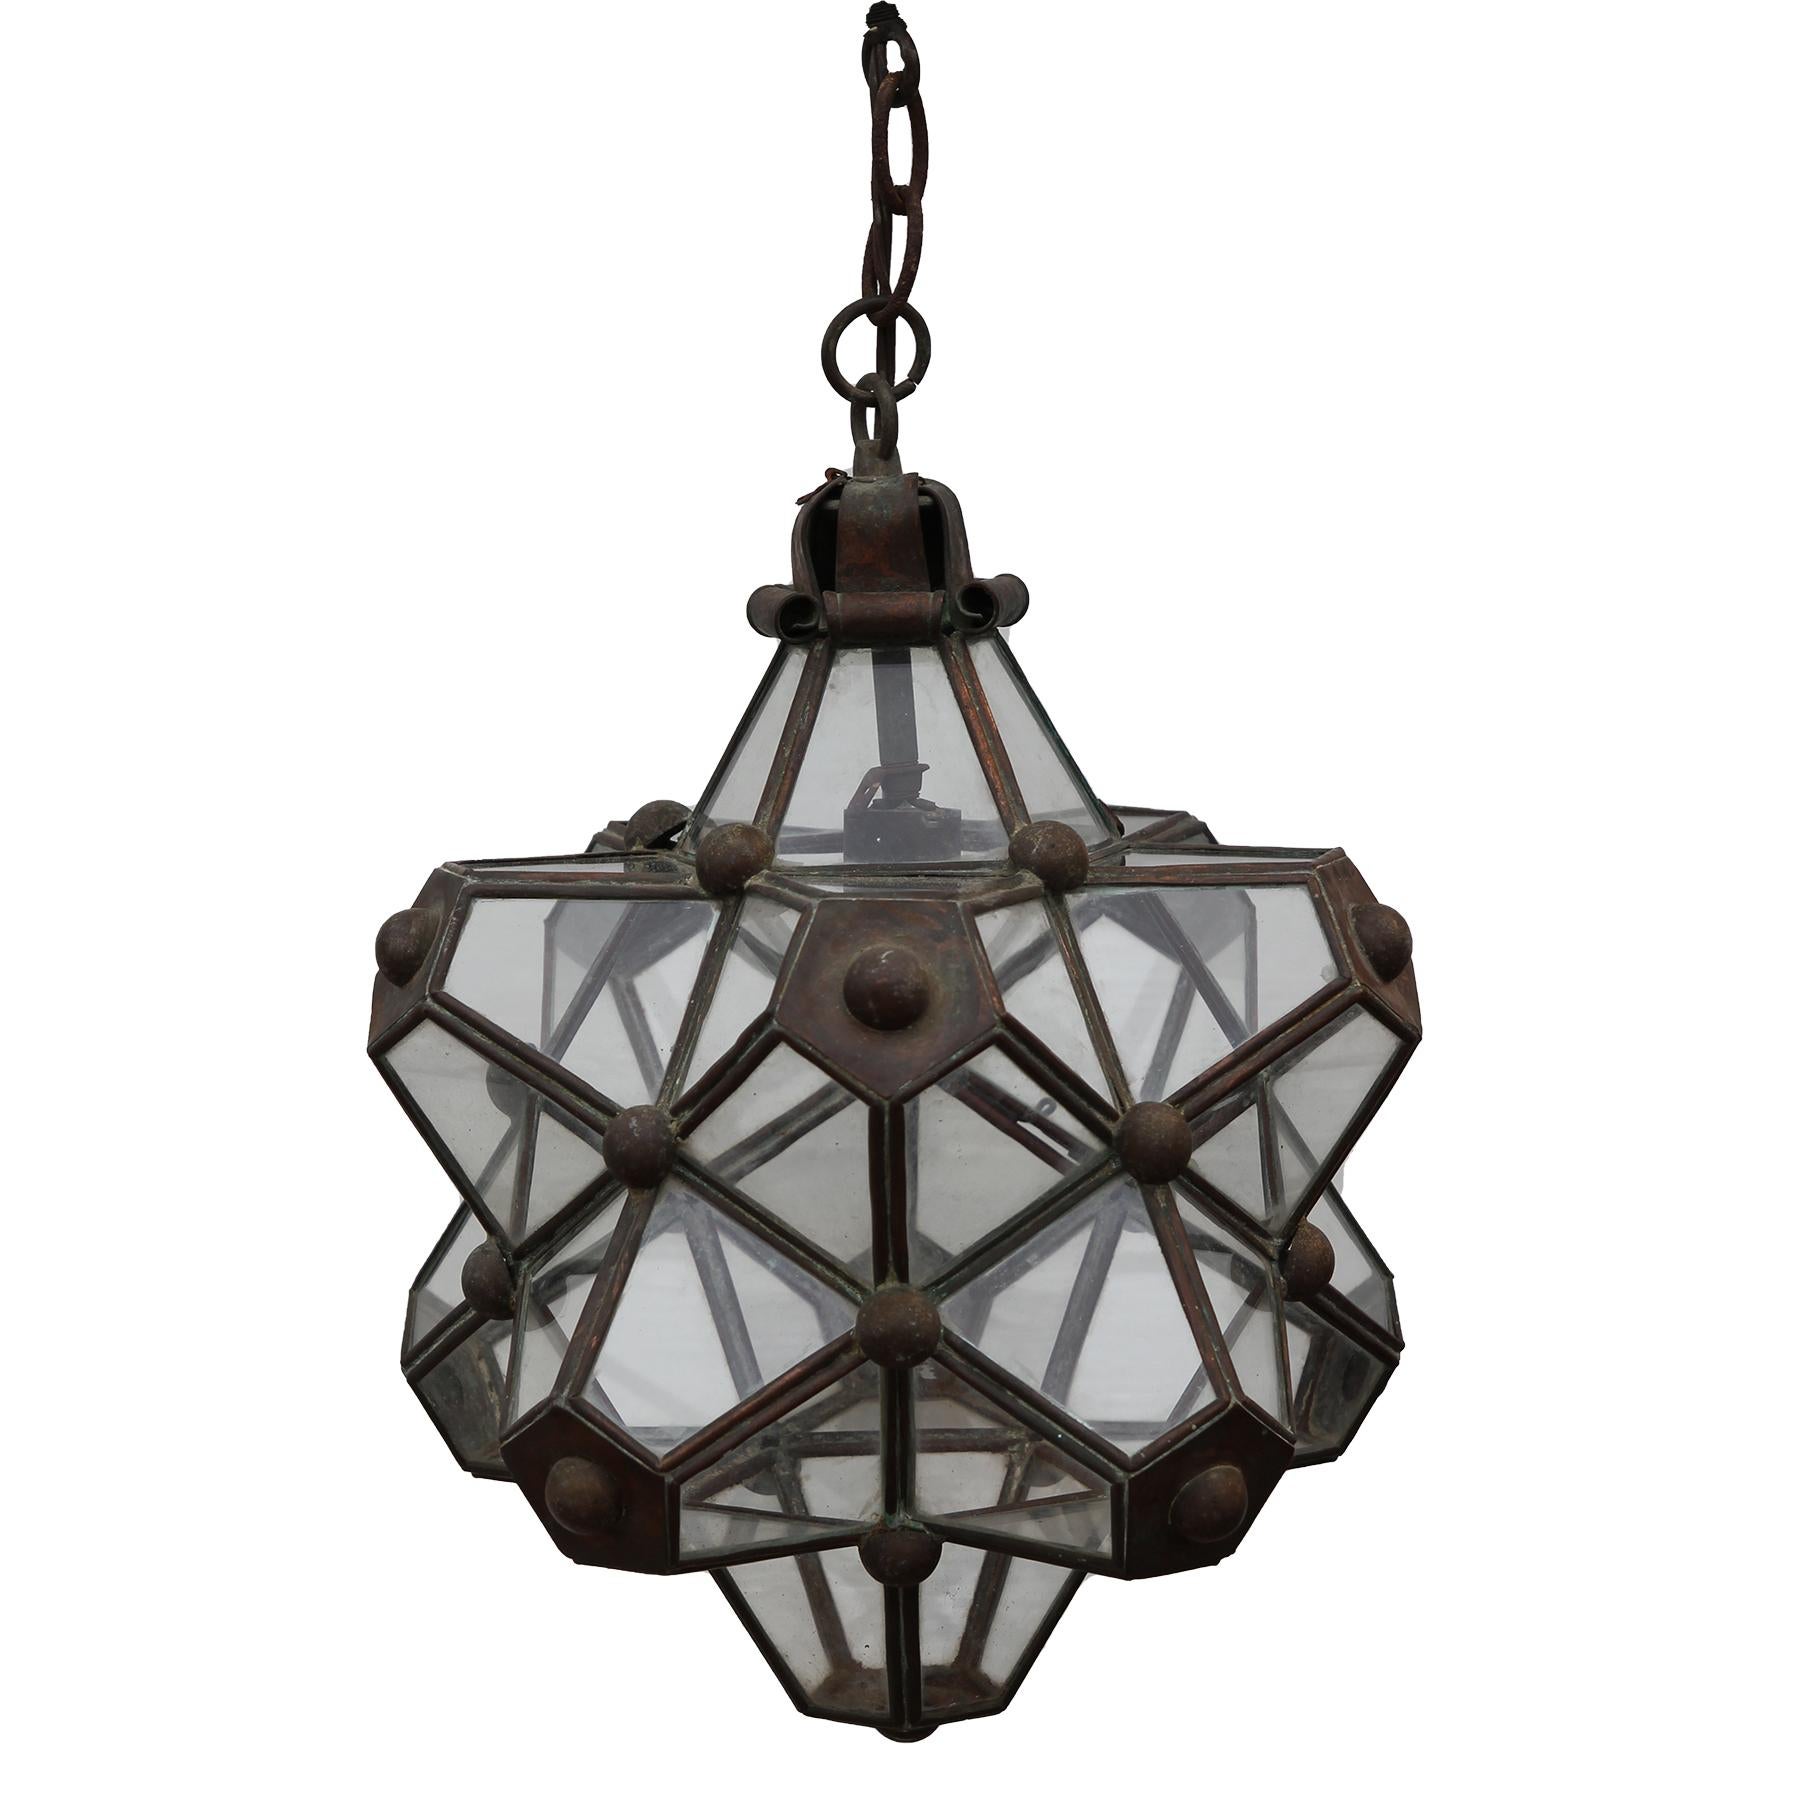 Hector Aguilar copper and brass architectural star light fixture that was created in 1945 and is in great condition. The framing of the light fixture incorporates copper and brass elements that hold each piece of glass.